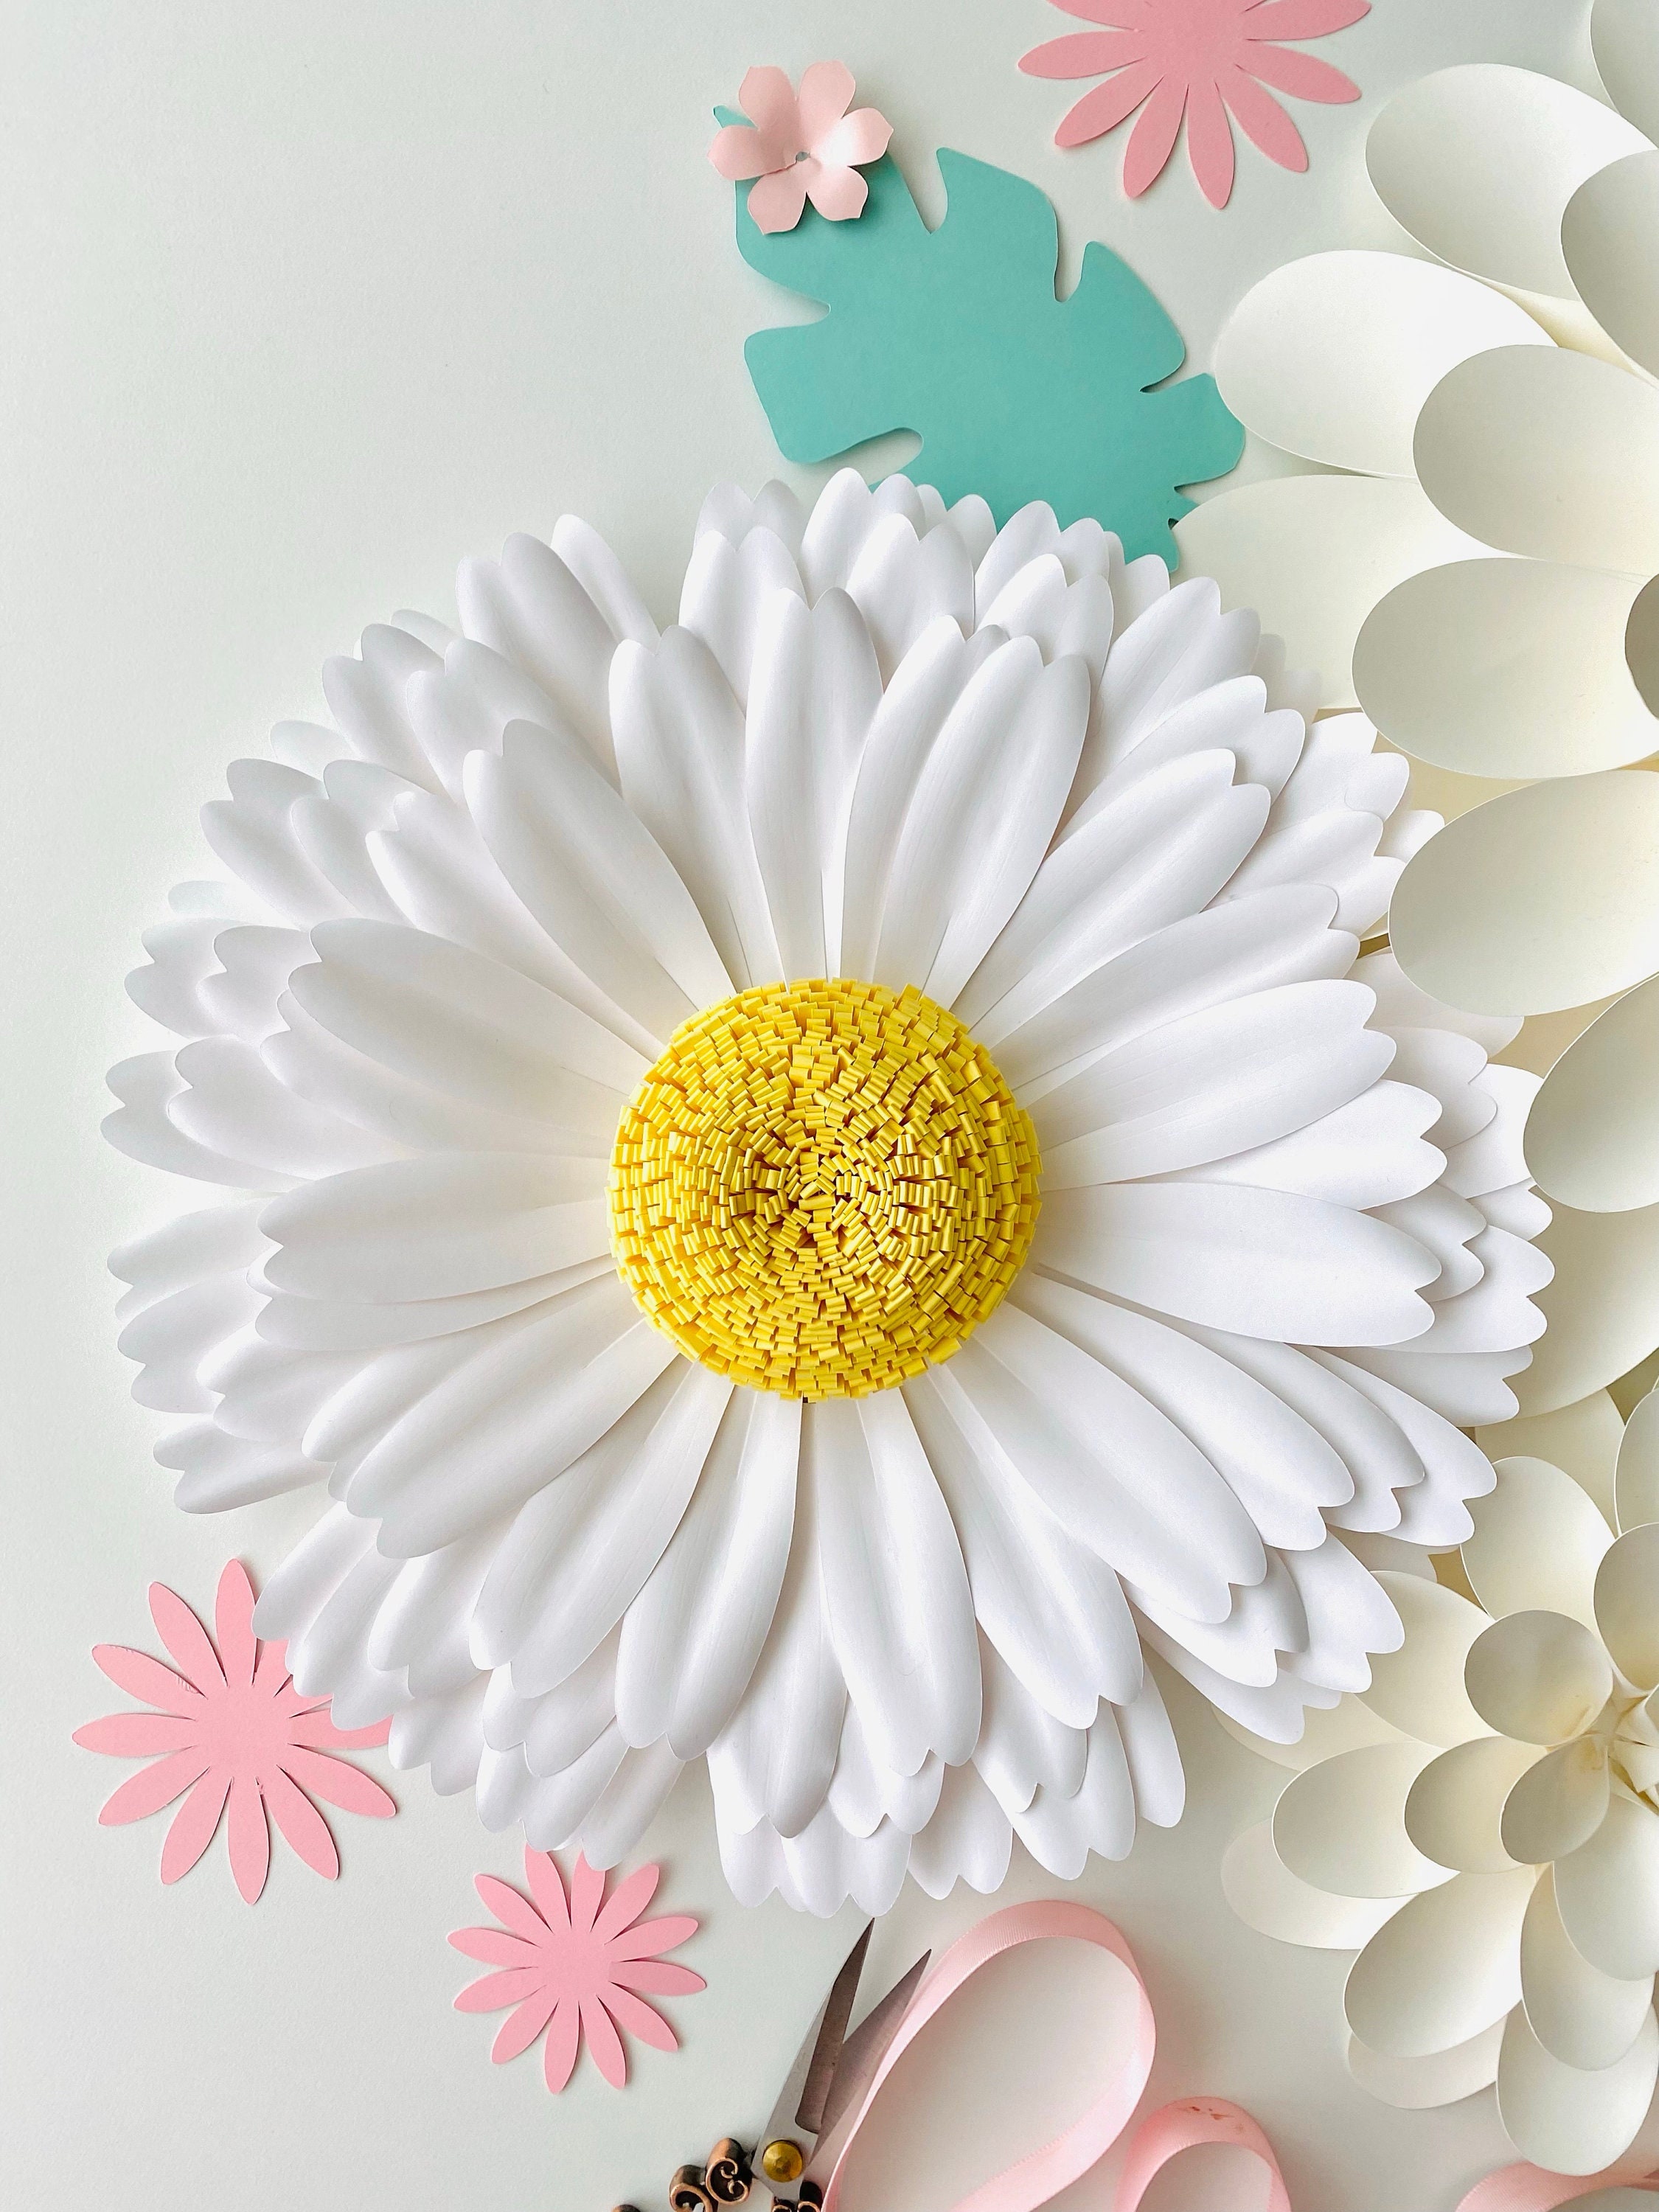 The Classic Daisy Ceramic Paint Palette - The Store at Mia